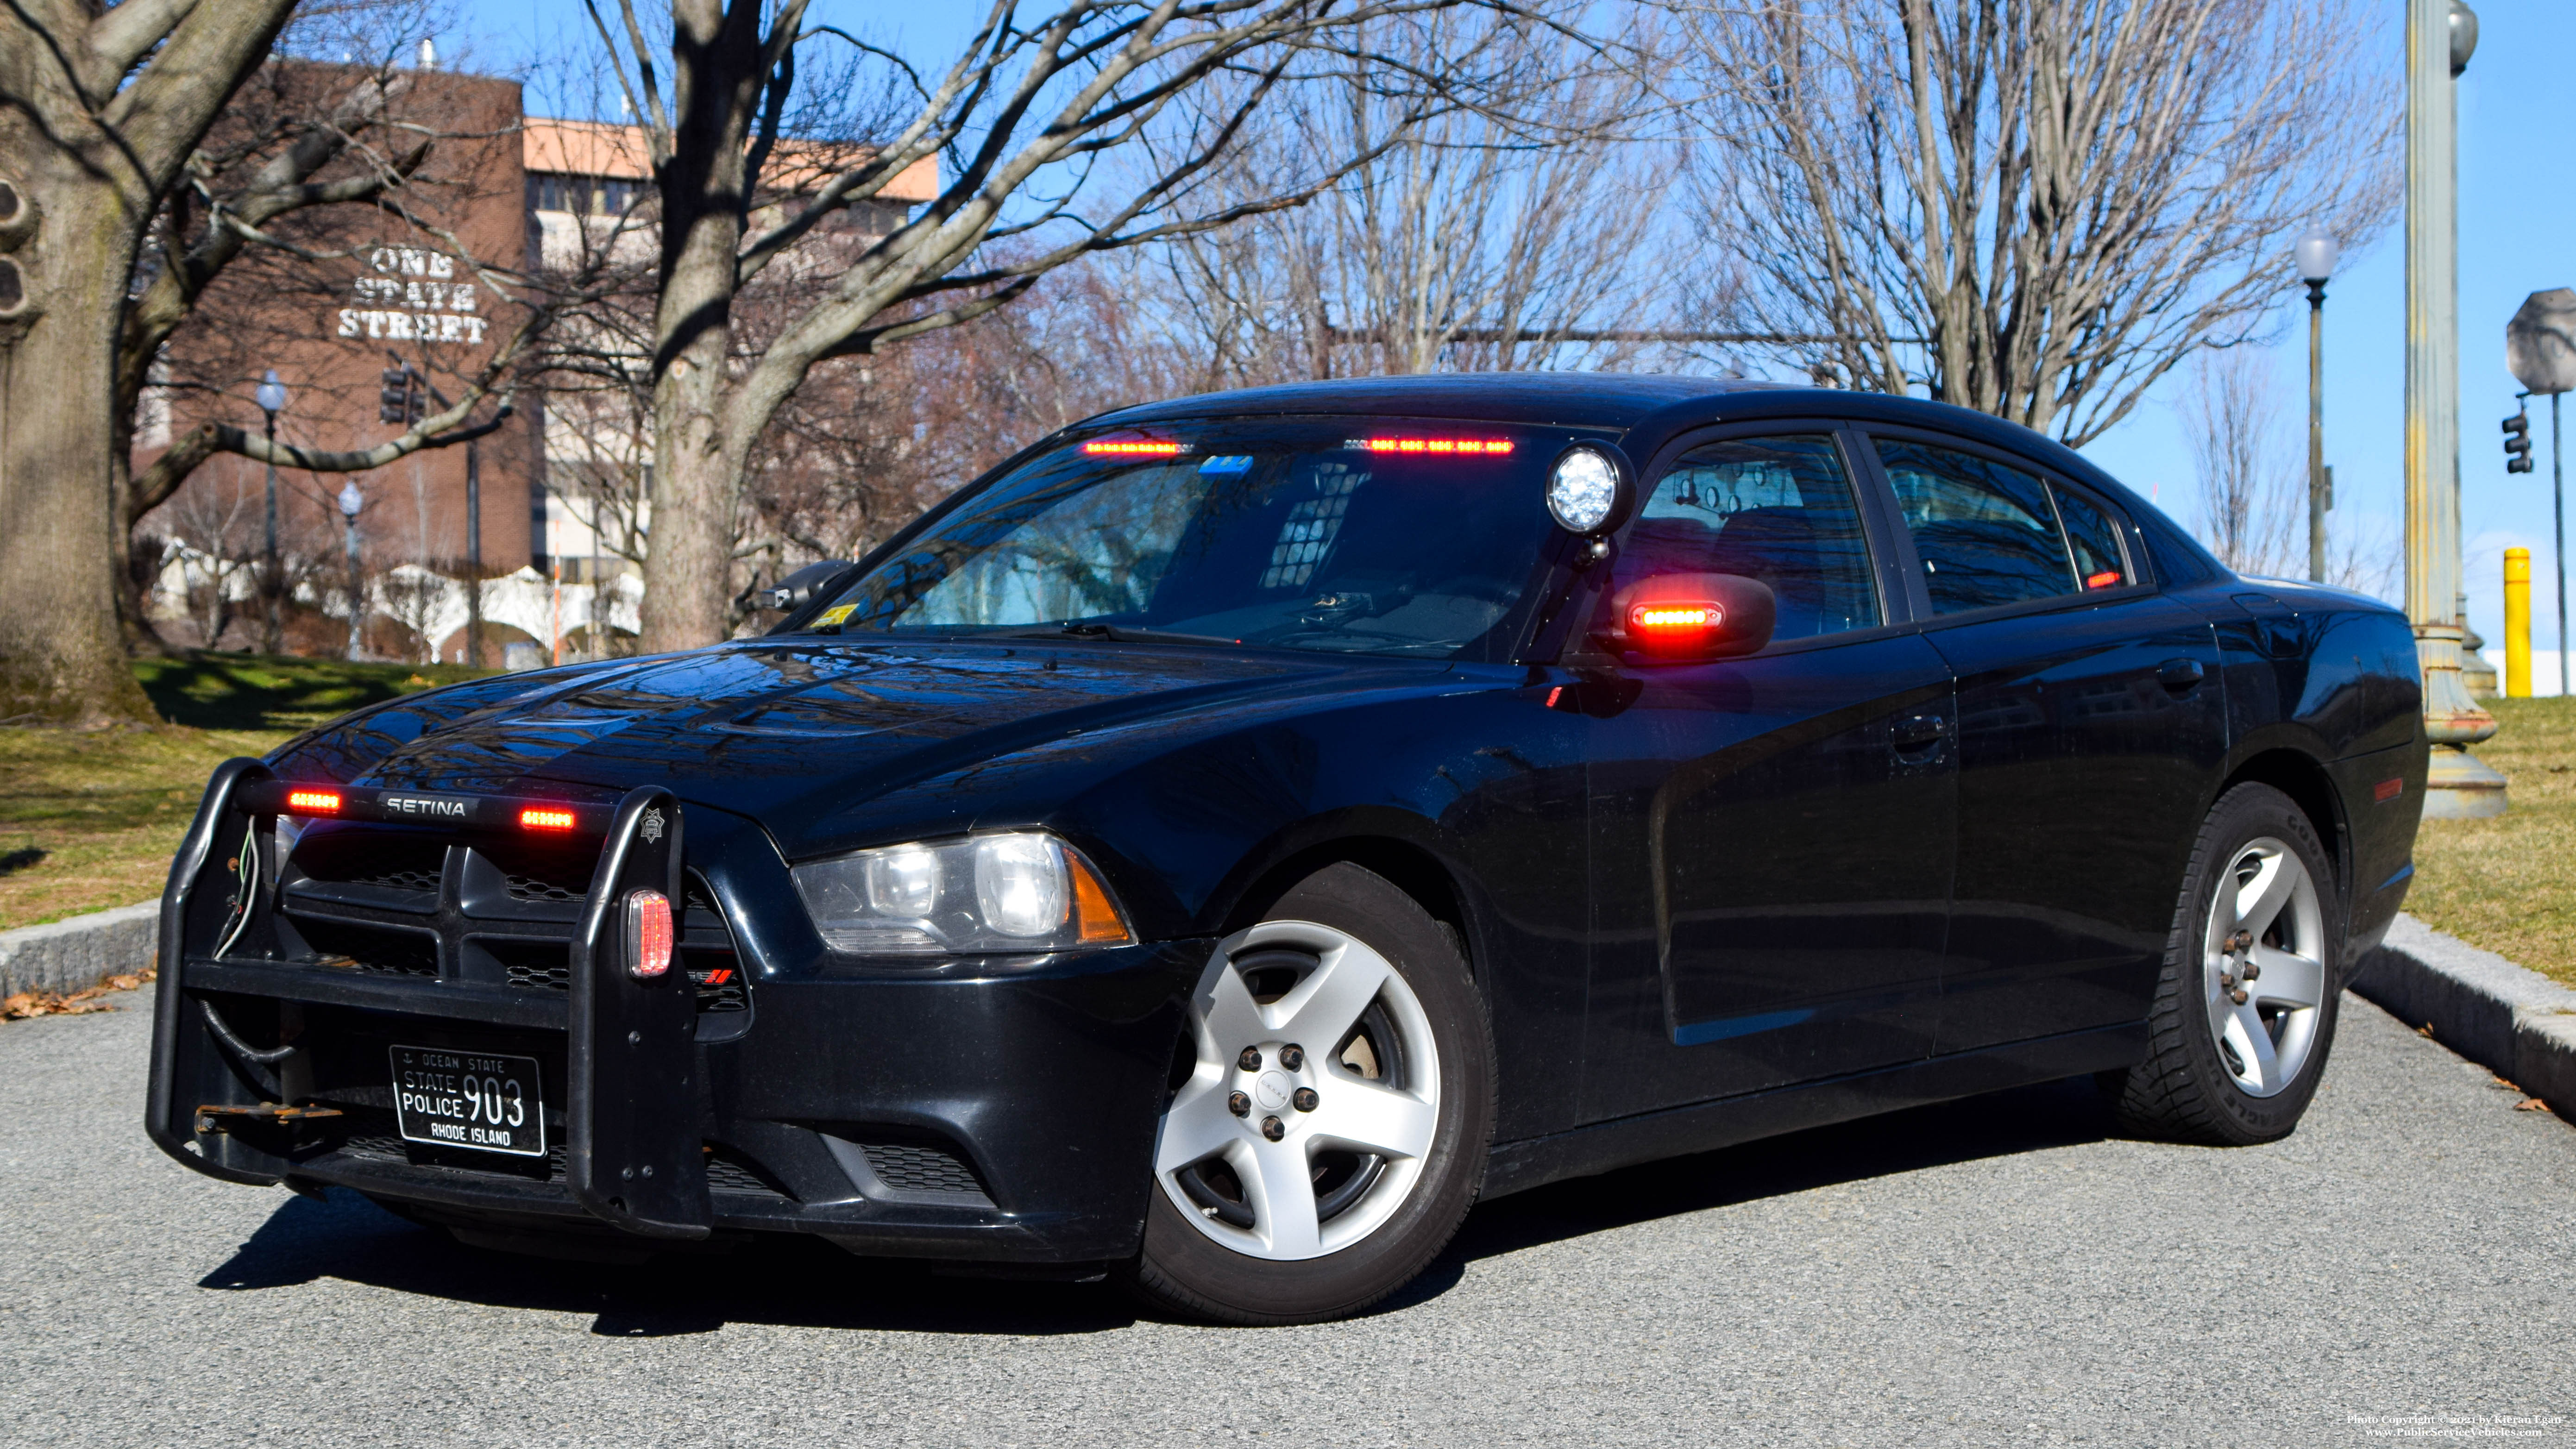 A photo  of Rhode Island State Police
            Cruiser 903, a 2013 Dodge Charger             taken by Kieran Egan